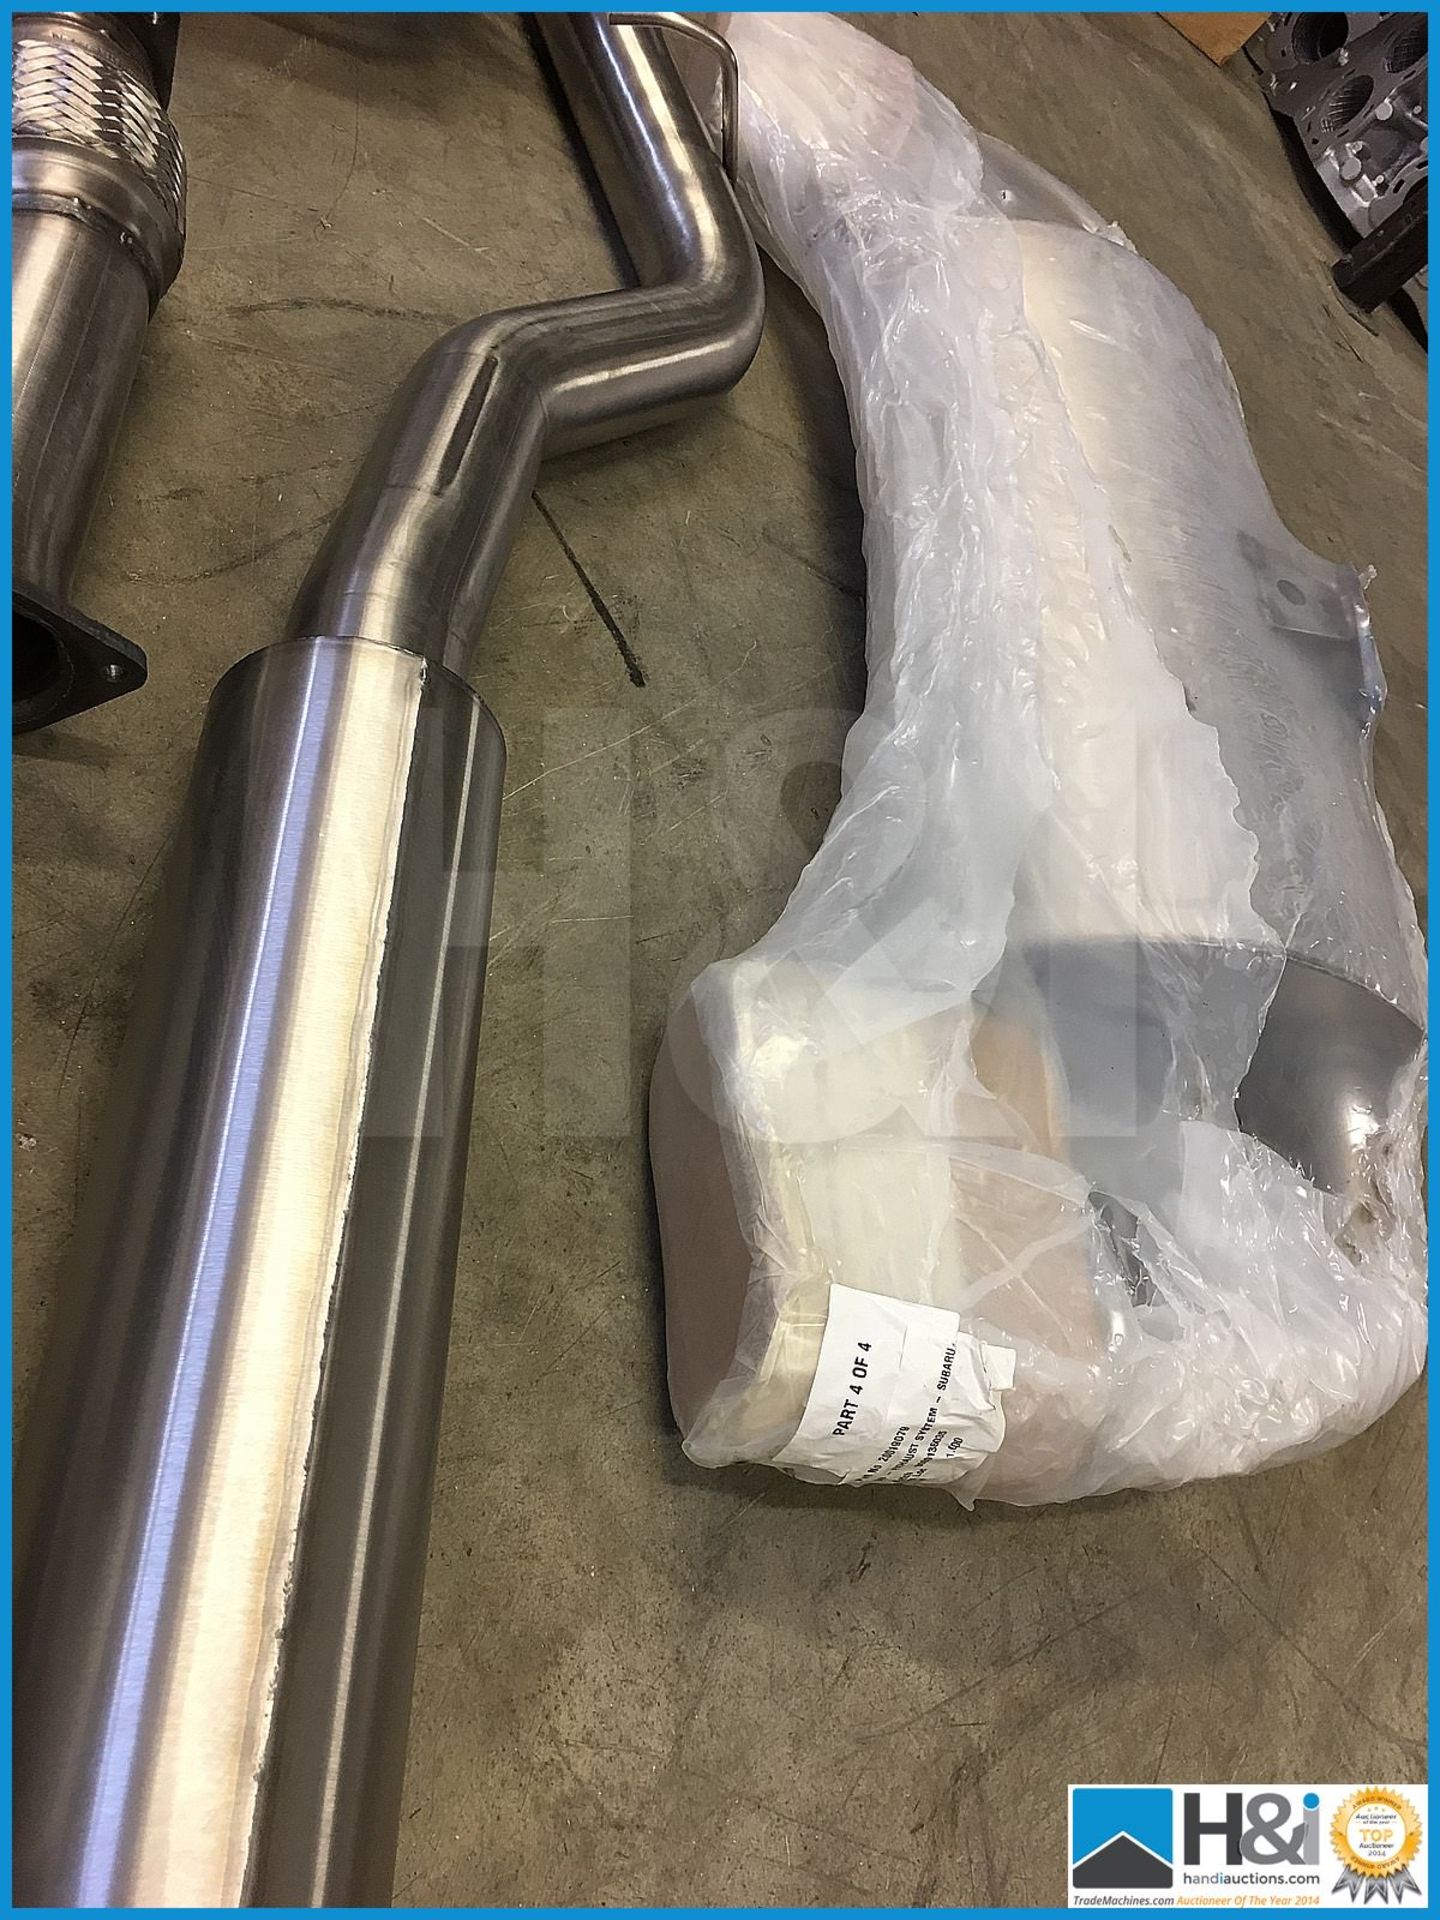 Subaru CS400 exhaust system. Last ones available in the world -- MC:N/A CILN:N/A - Image 5 of 6